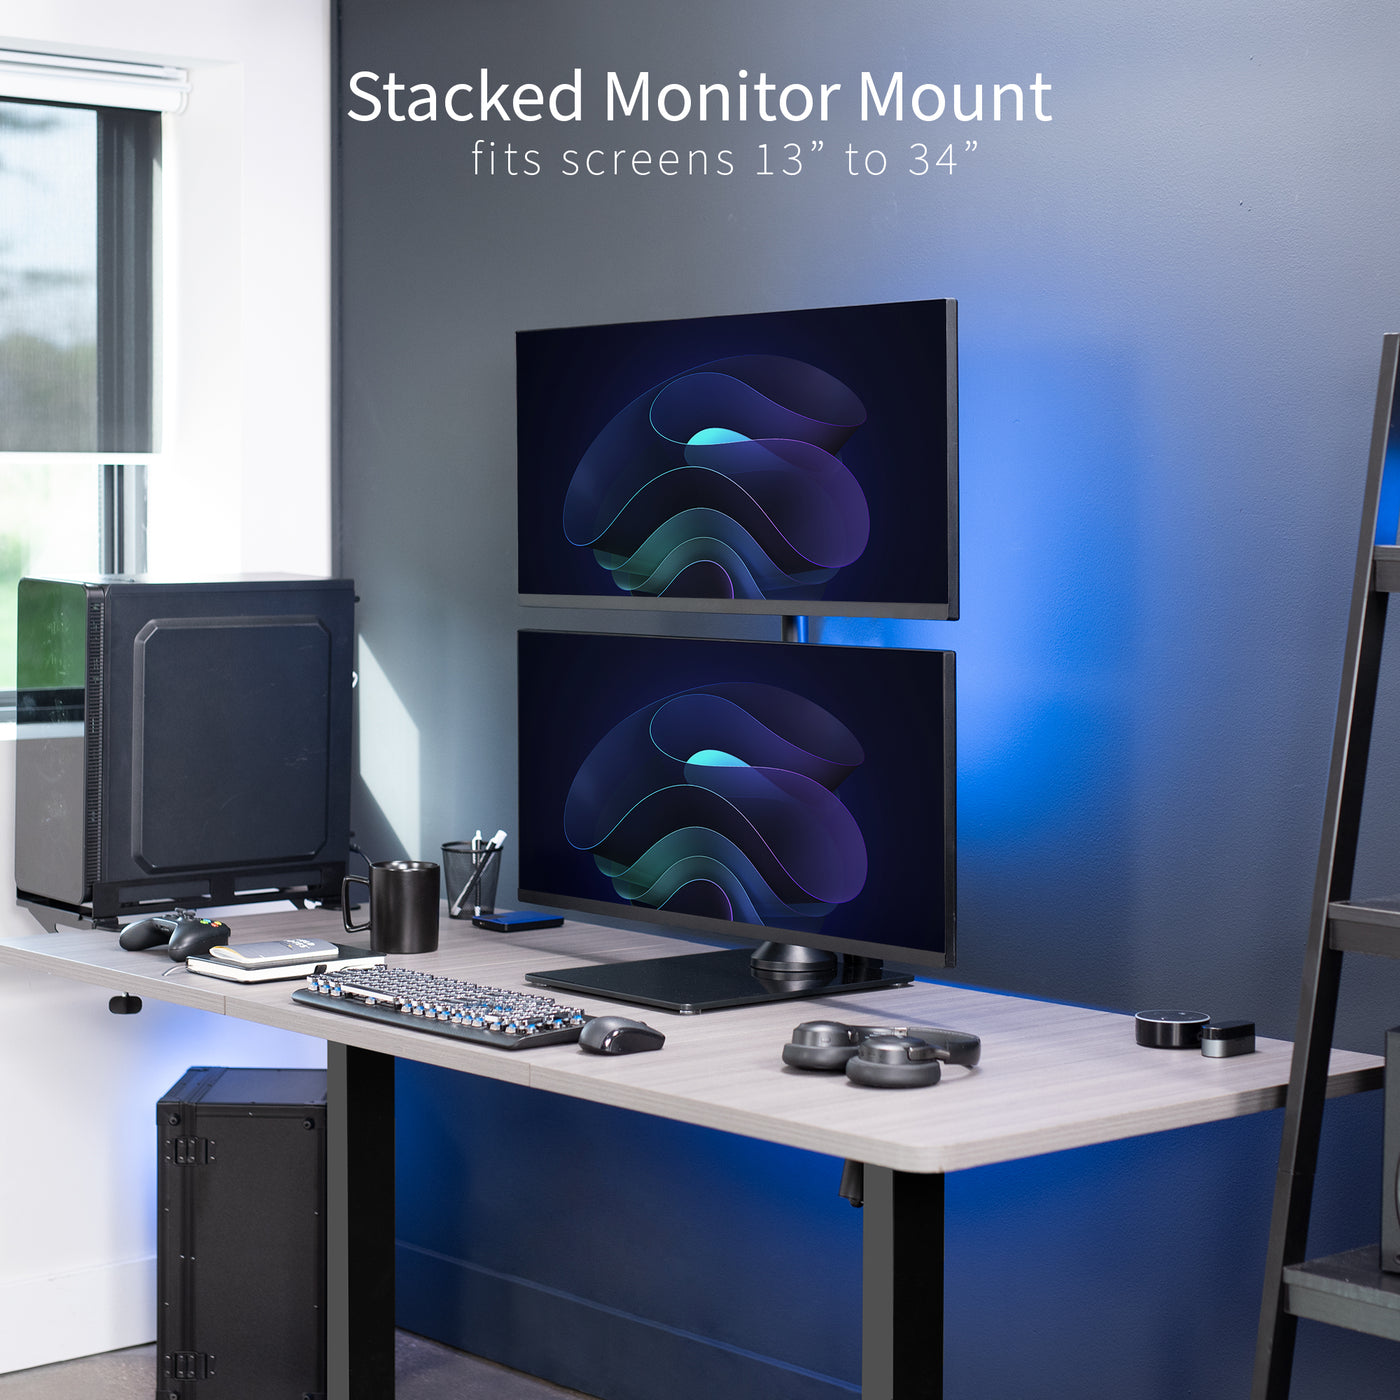 Tall dual monitor desk stand for stacked array with sturdy glass base.